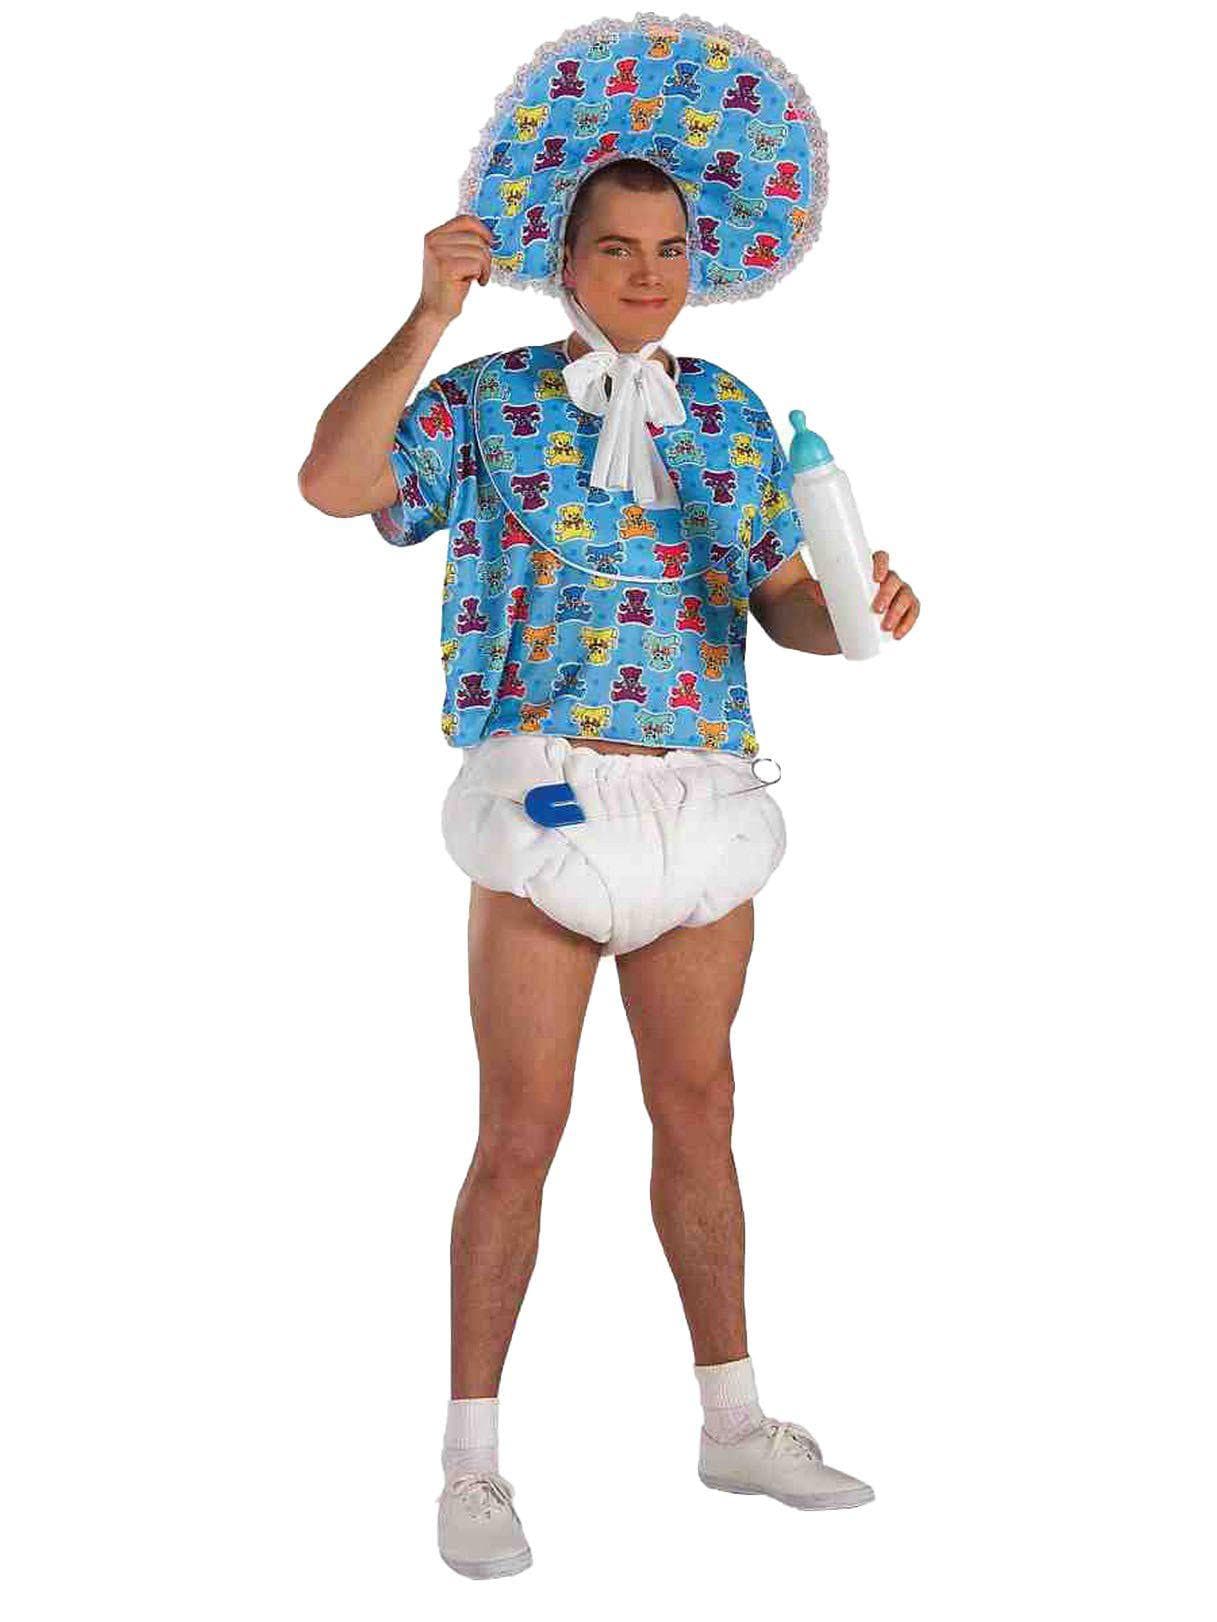 Adult Blue Baby Boomer Costume - costumes.com